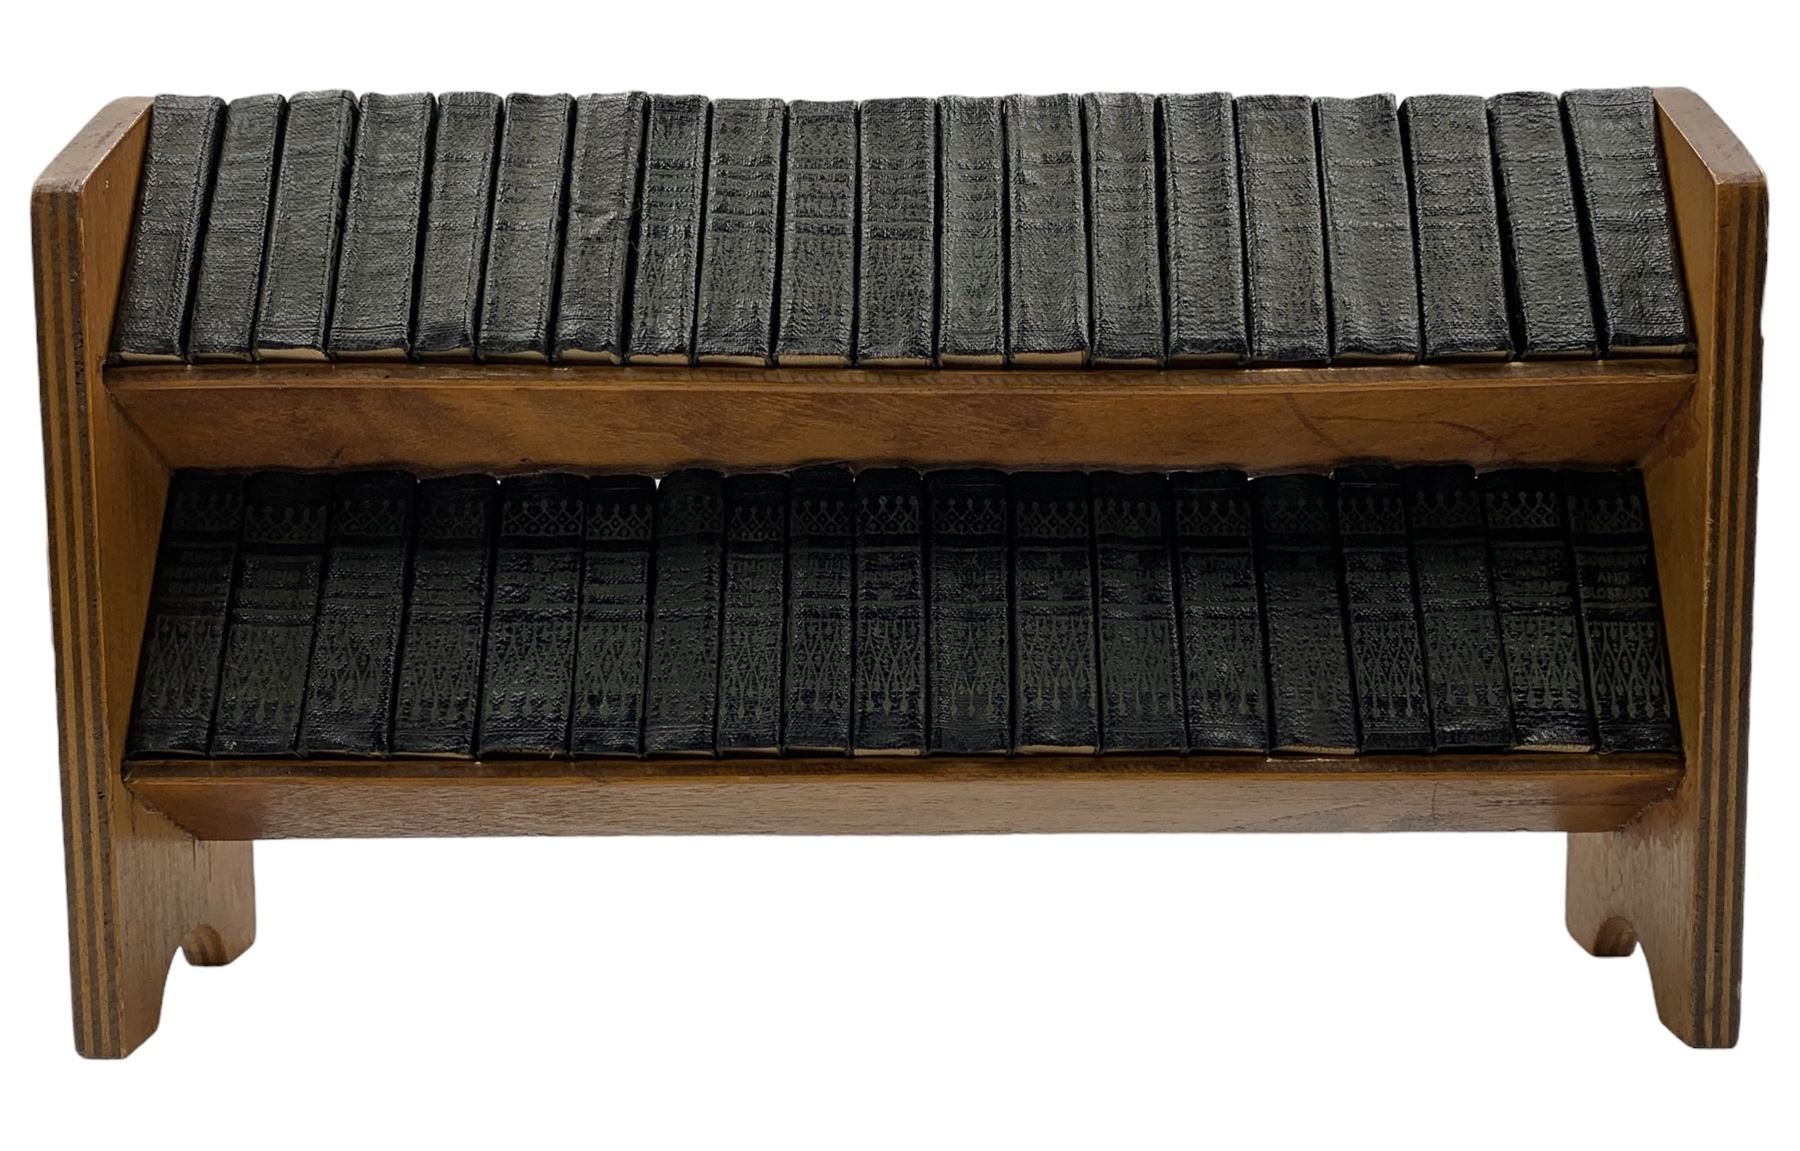 A complete set of thirty-nine miniature Shakespeare plays